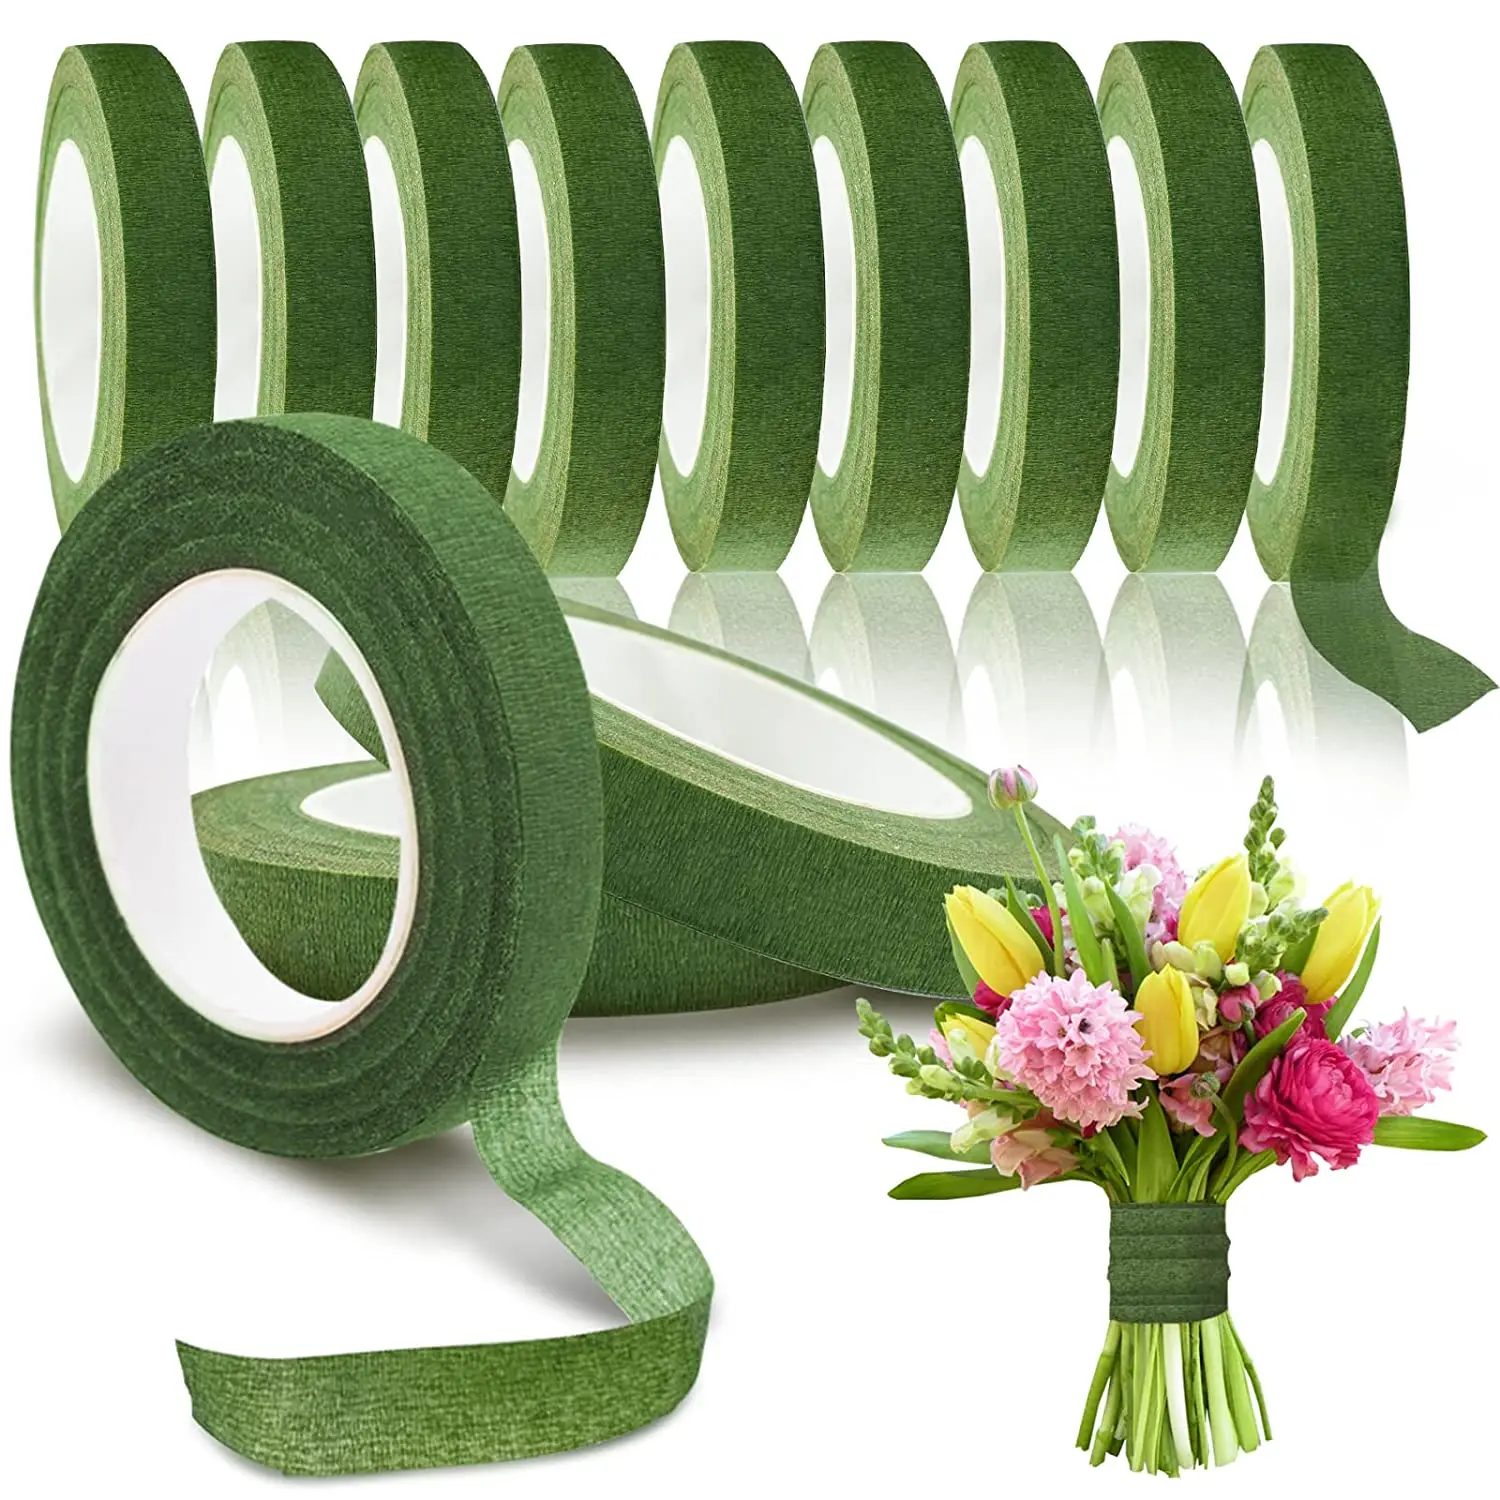 Floral Tape For Bouquet 88Ft Self-adhesive Paper Tape Wedding/Christmas Bouquet Wreath Bundling Tool Flower Stem Wrapper